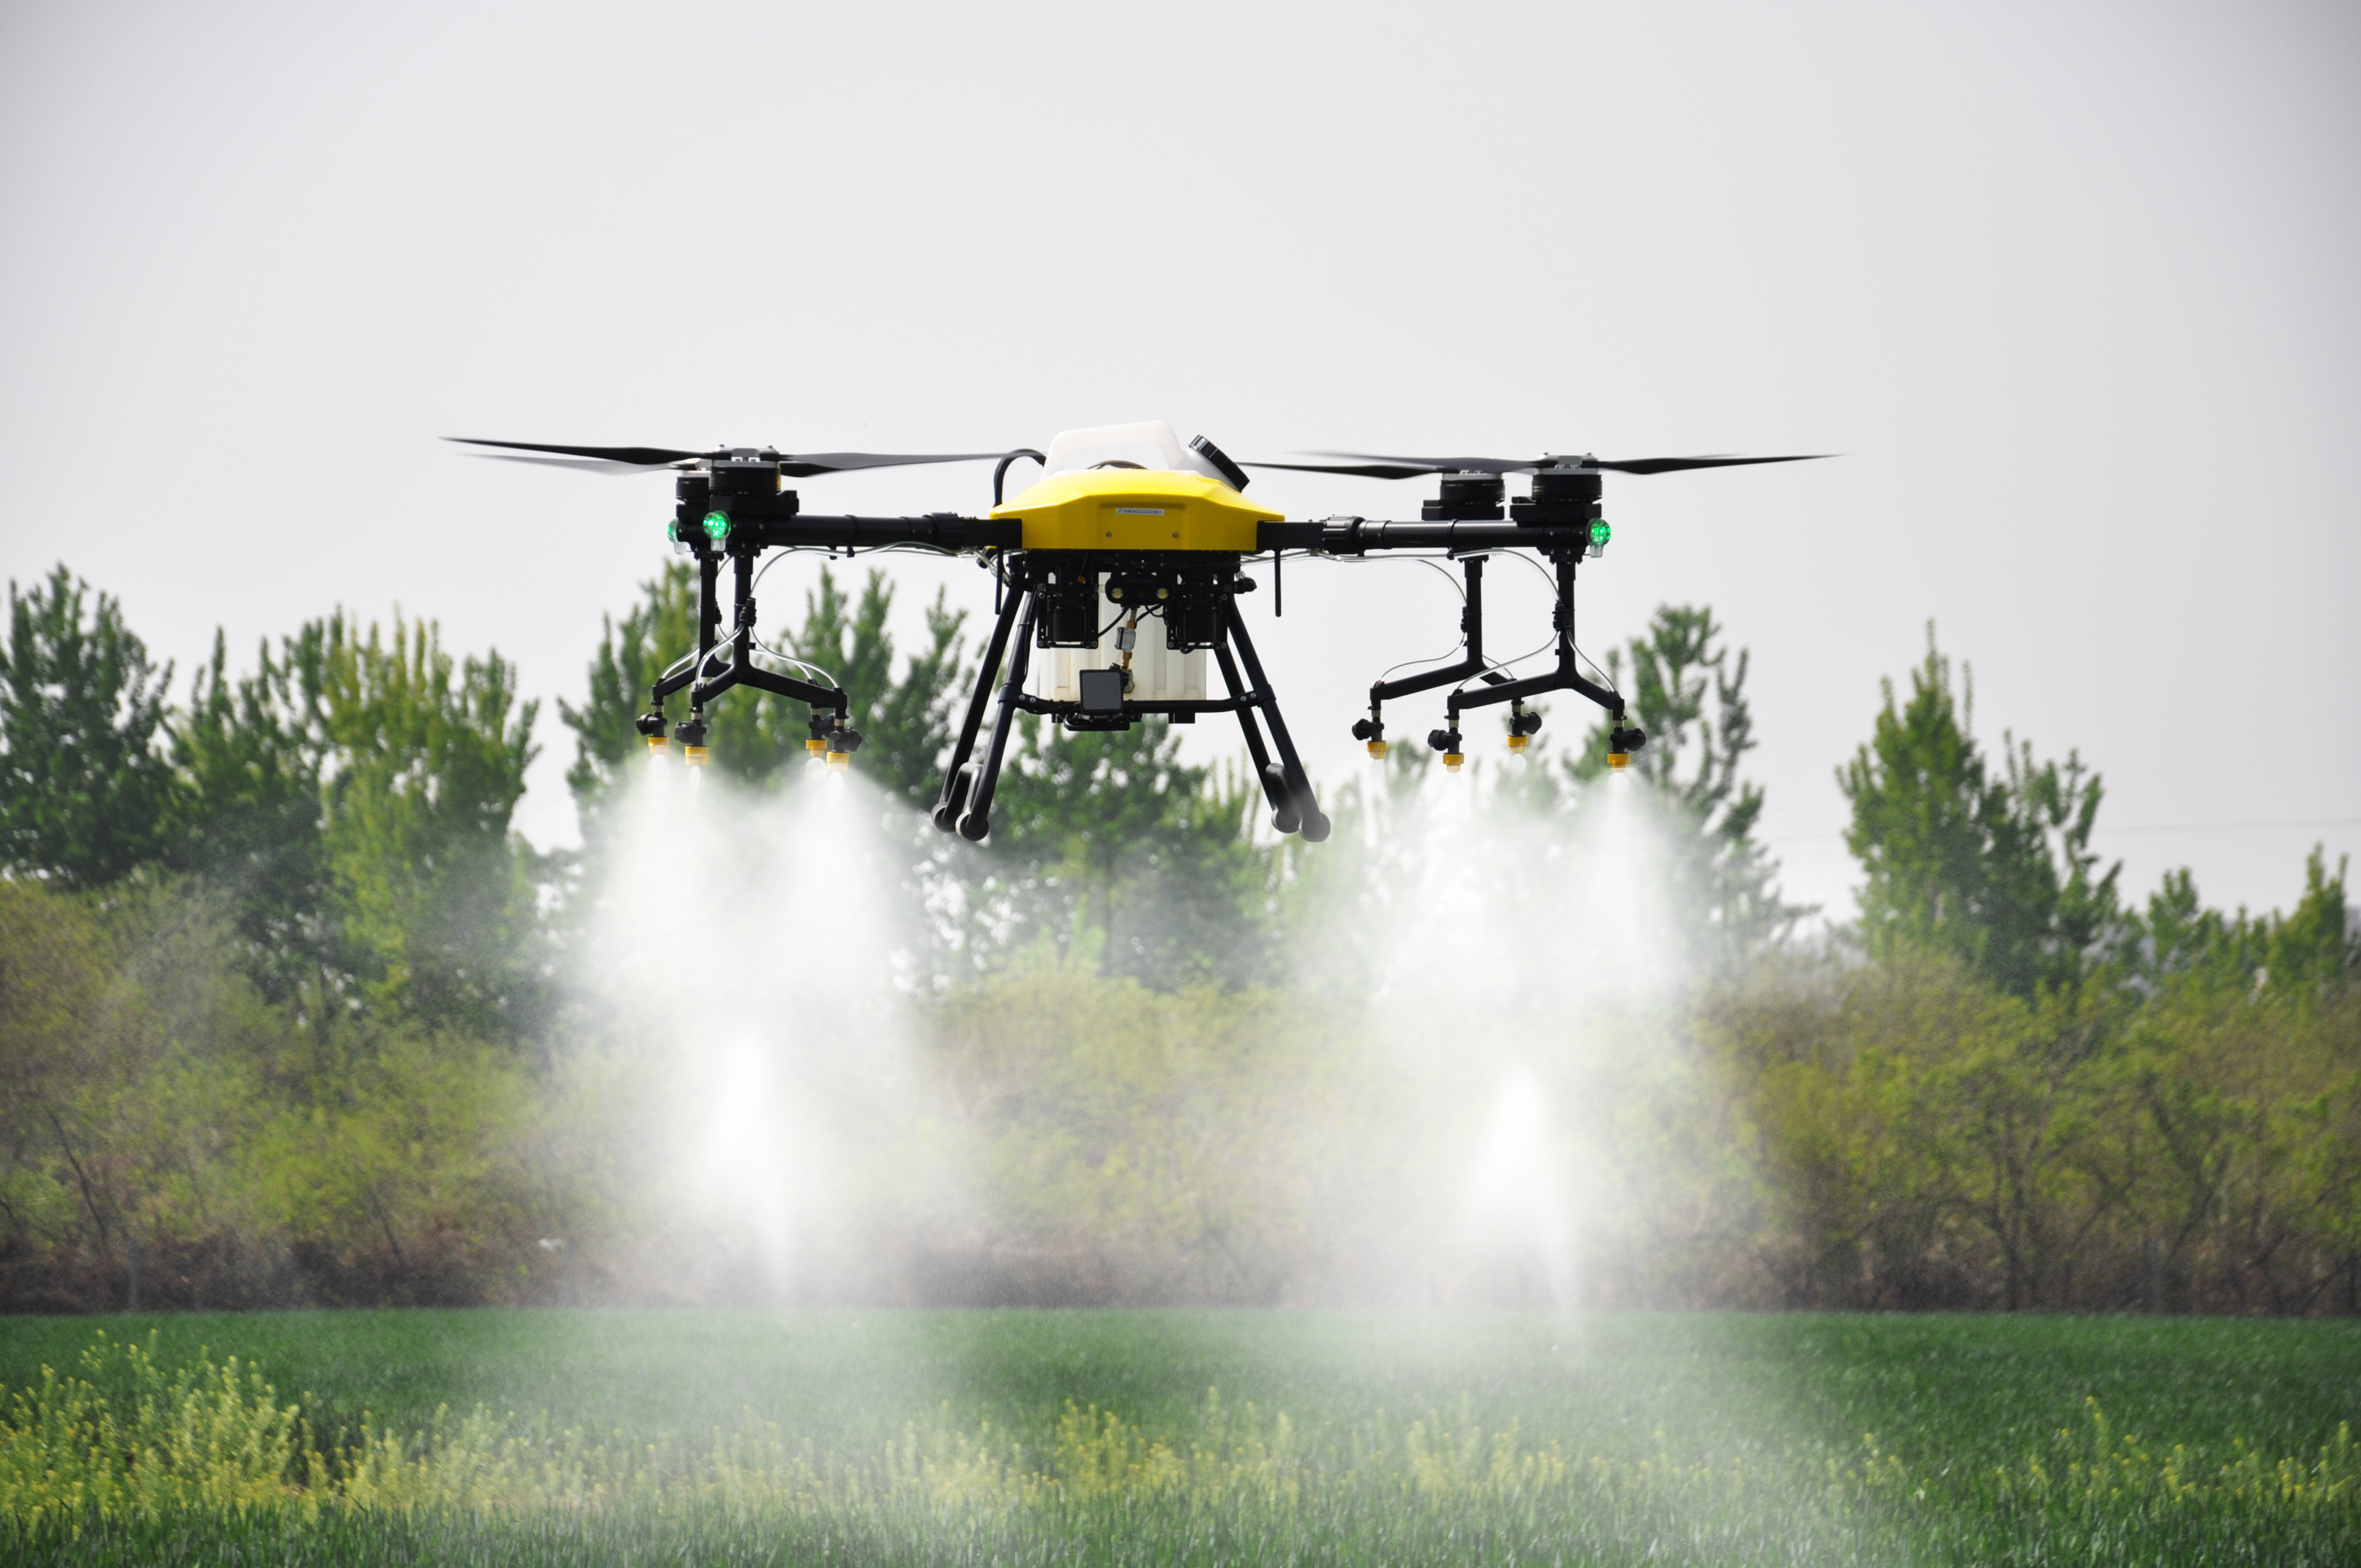 Joyance 30lt drone with centrifugal nozzles has perfect spraying effect